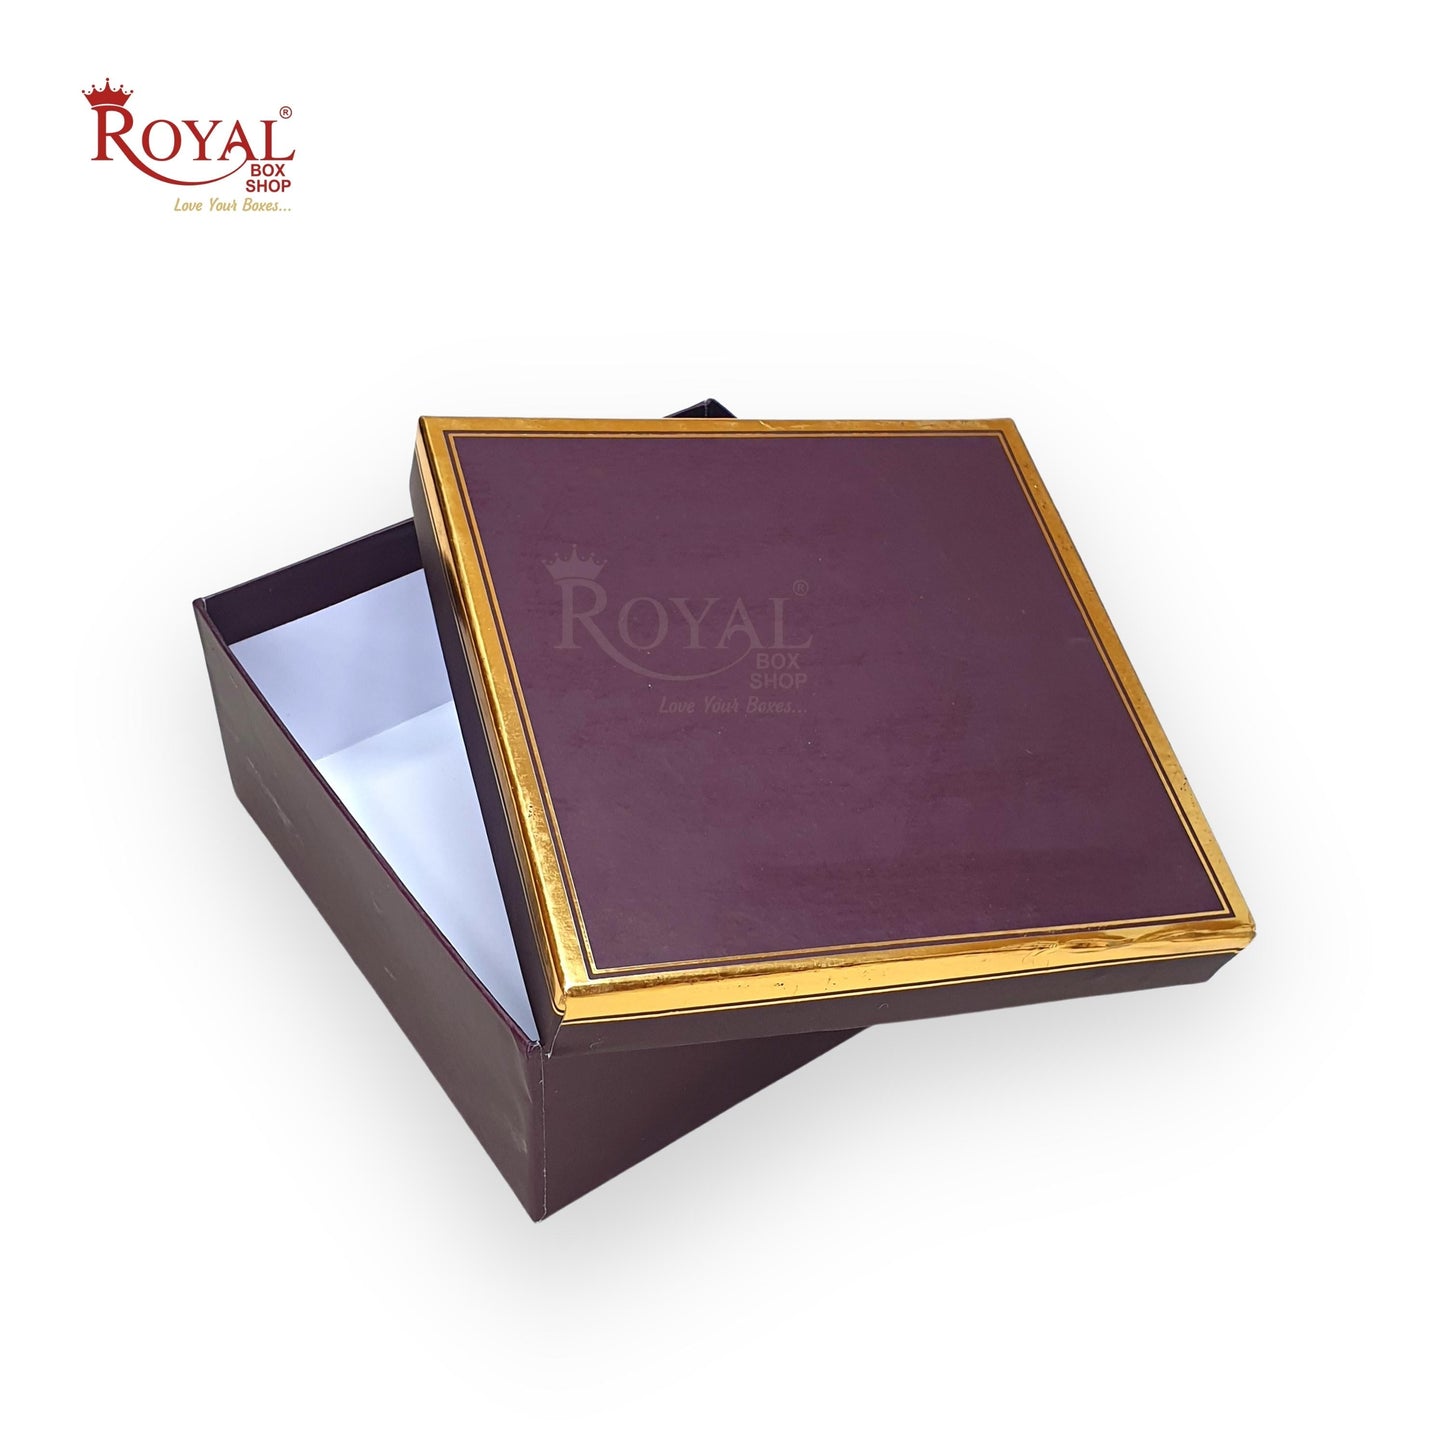 Hamper Gift Boxes I 8x8x4 Inches I Wine Color with Gold Foiling I For Return Wedding Corporate Hamper Gifts Box Royal Box Shop